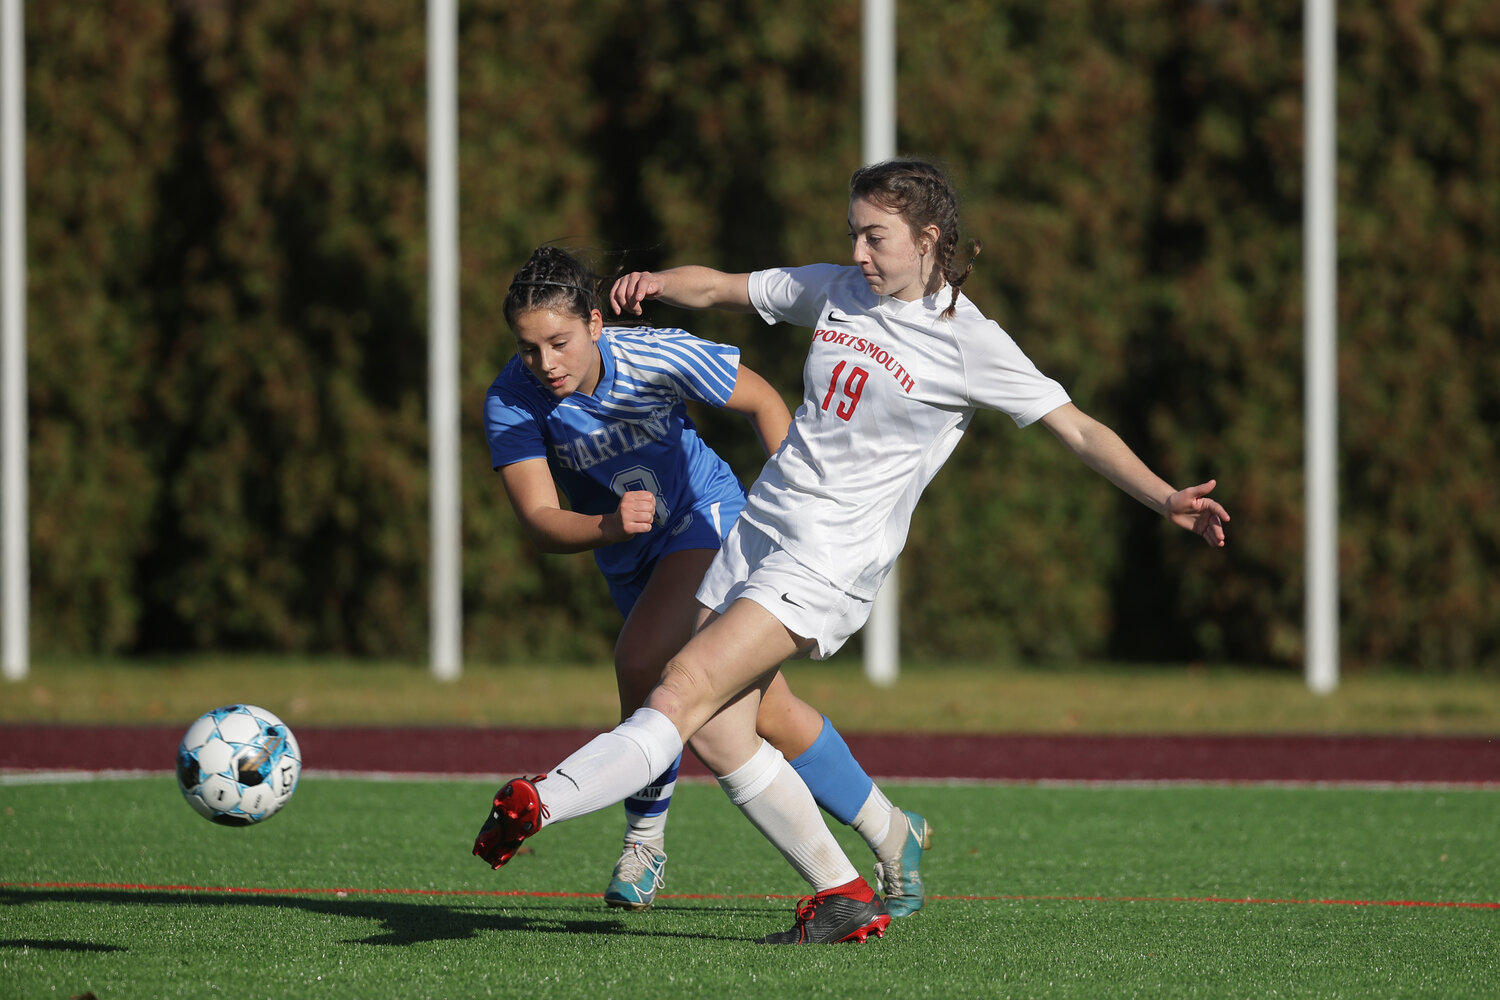 The Patriots’ Clair Hook boots the ball by a defender. The senior would put the Patriots up 4-0, with a goal in the second half.